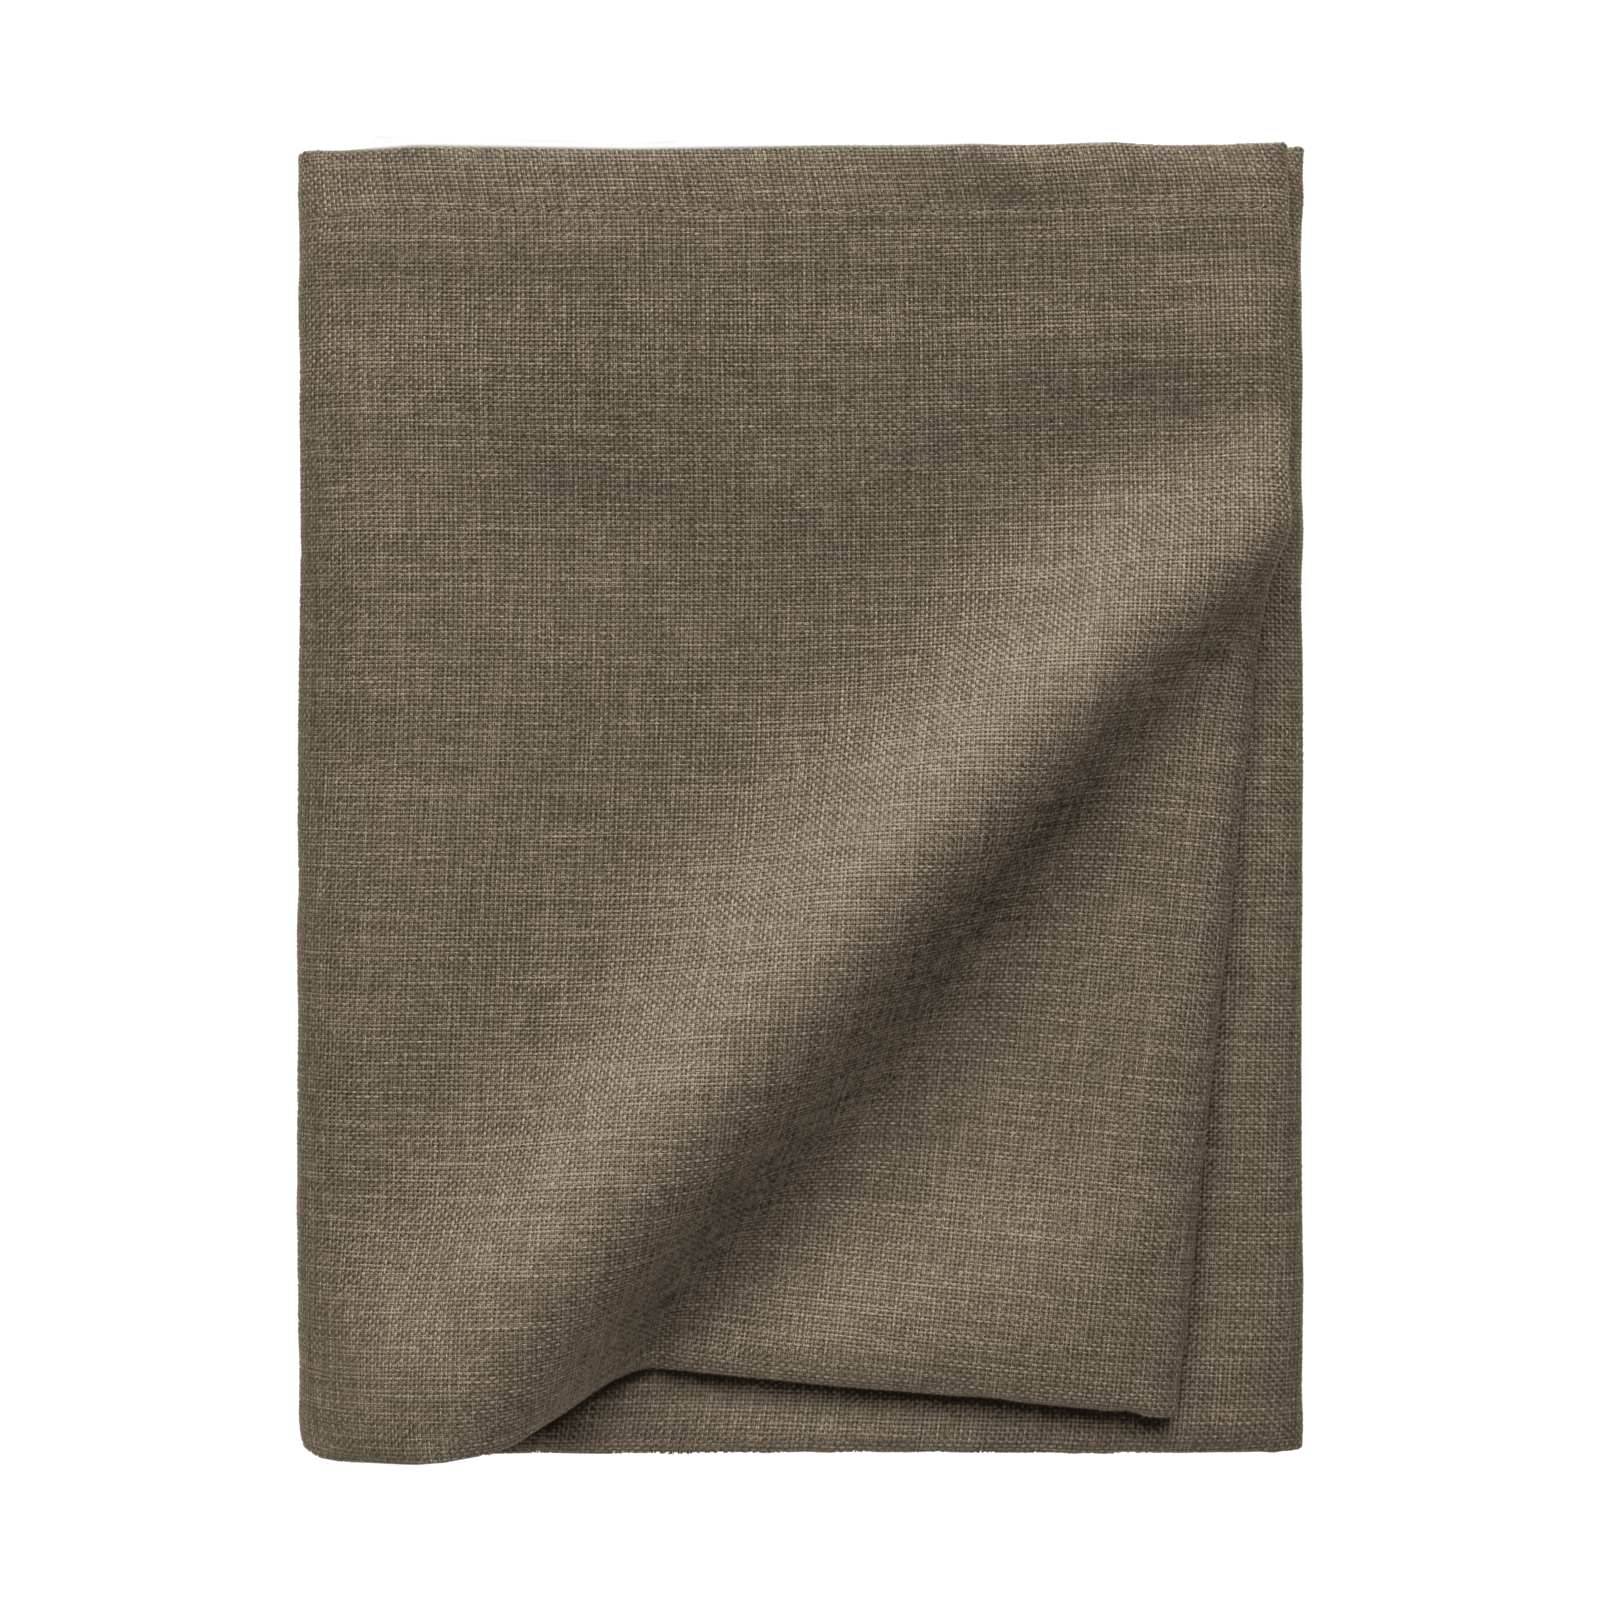 Größe: 130x 170 cm Farbe: taupe #farbe_taupe